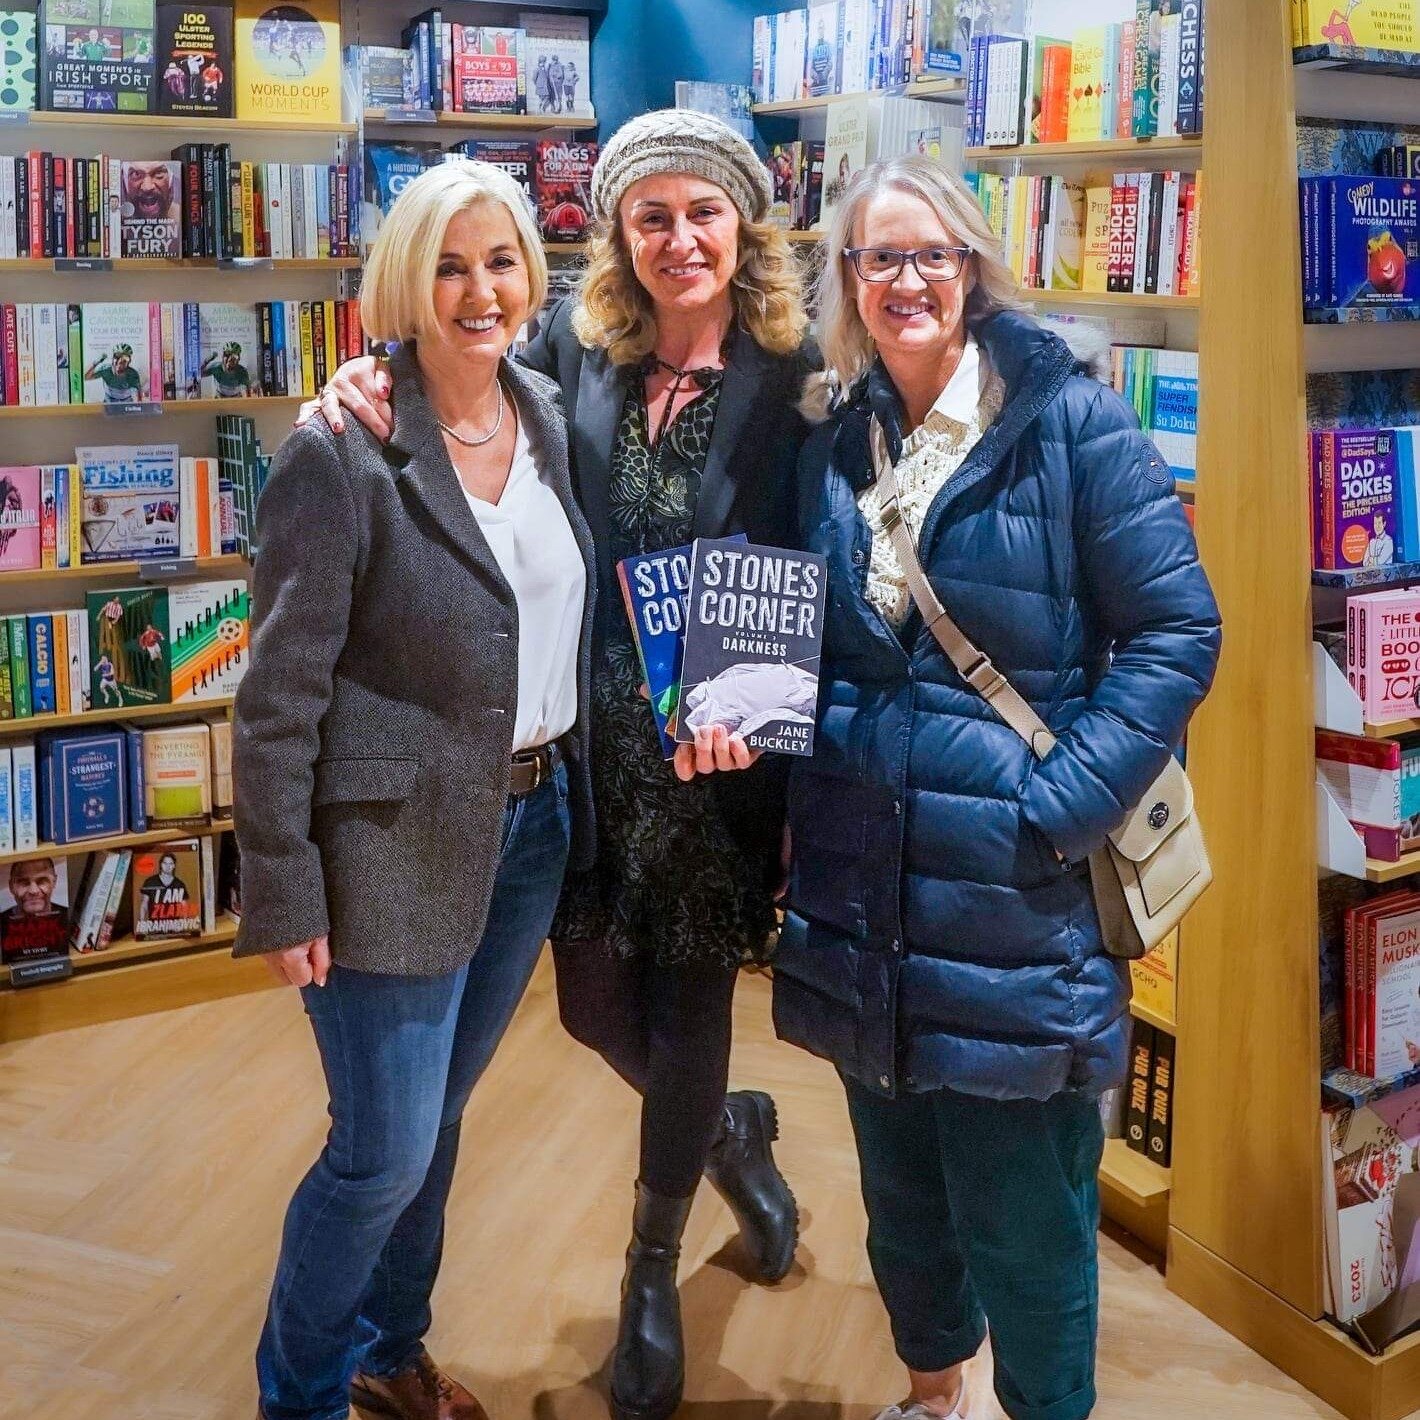 A couple of lovely readers popped into Waterstones in Foyleside last Saturday to purchase copies of the Stones Corner series and listen to a short reading.

What an afternoon, it was wonderful so many called in to say hello!

#derry #londonderry #der